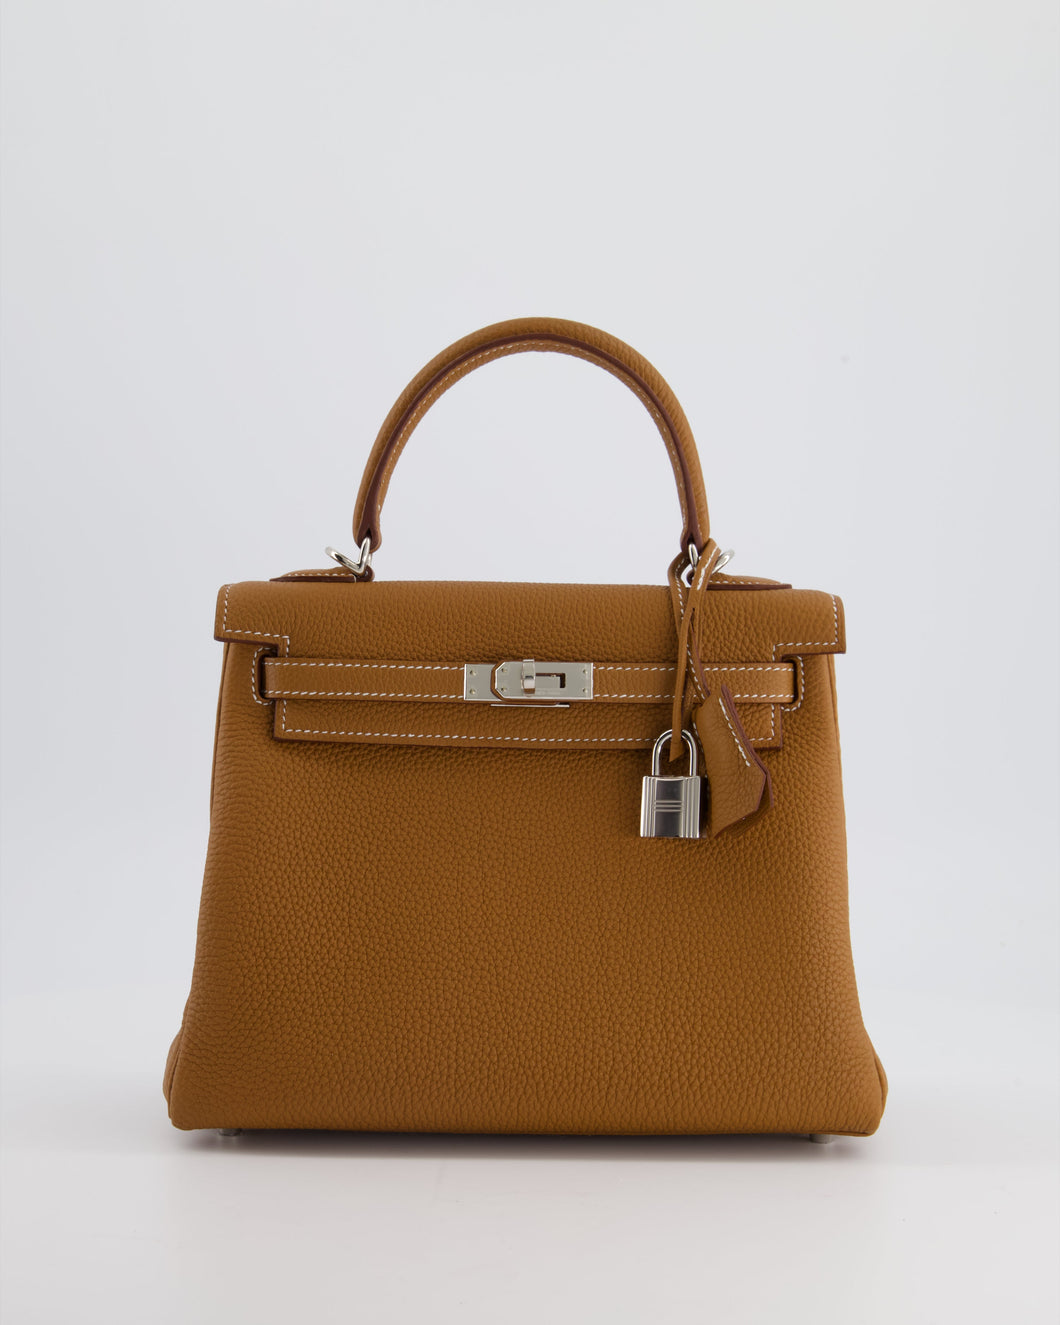 Hermes Kelly Bag 25cm in Gold with Togo Leather and Palladium Hardware